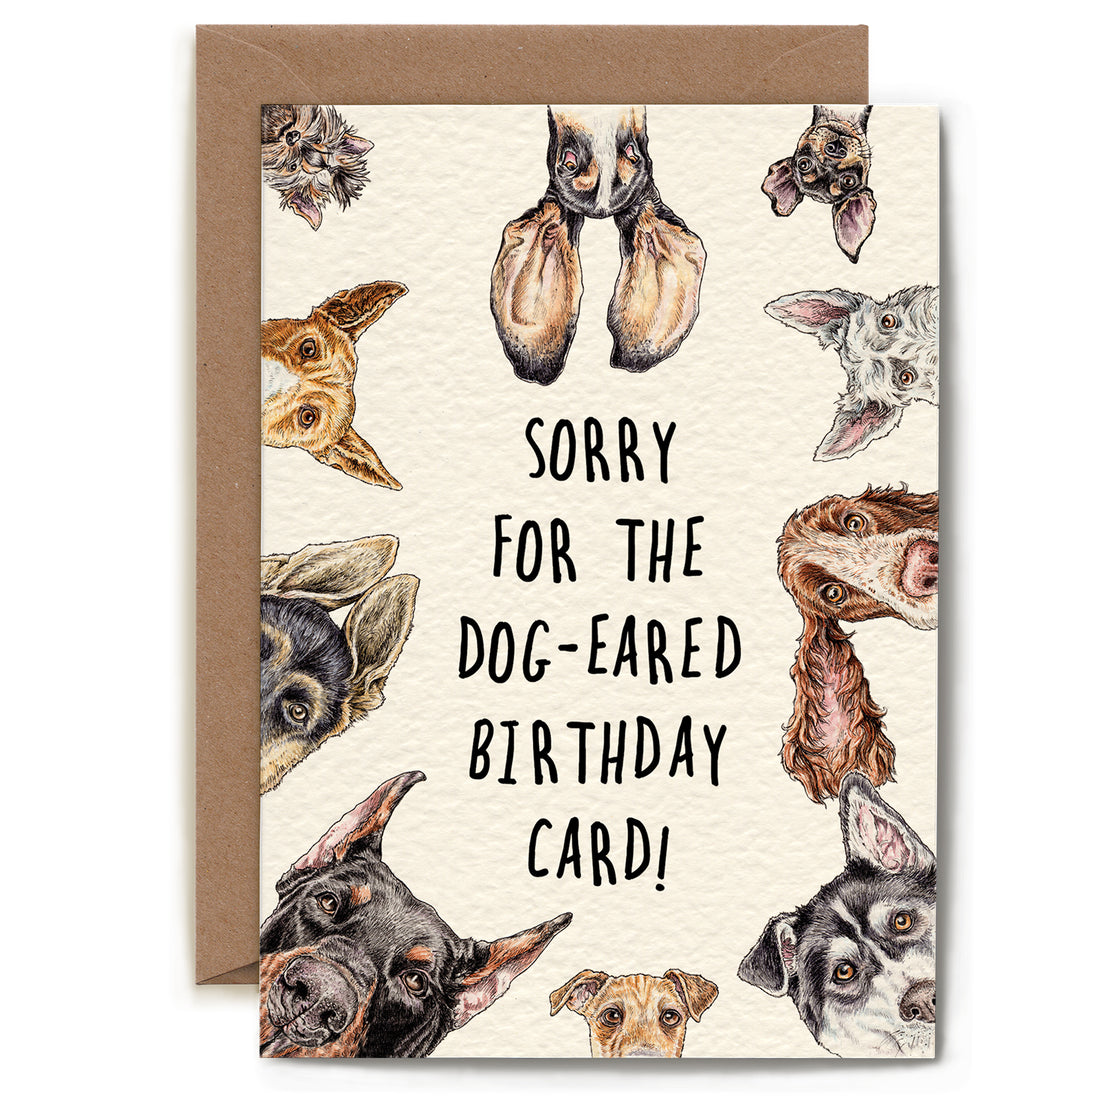 Sorry for the Hester &amp; Cook Dog Eared Card with animal illustrations.